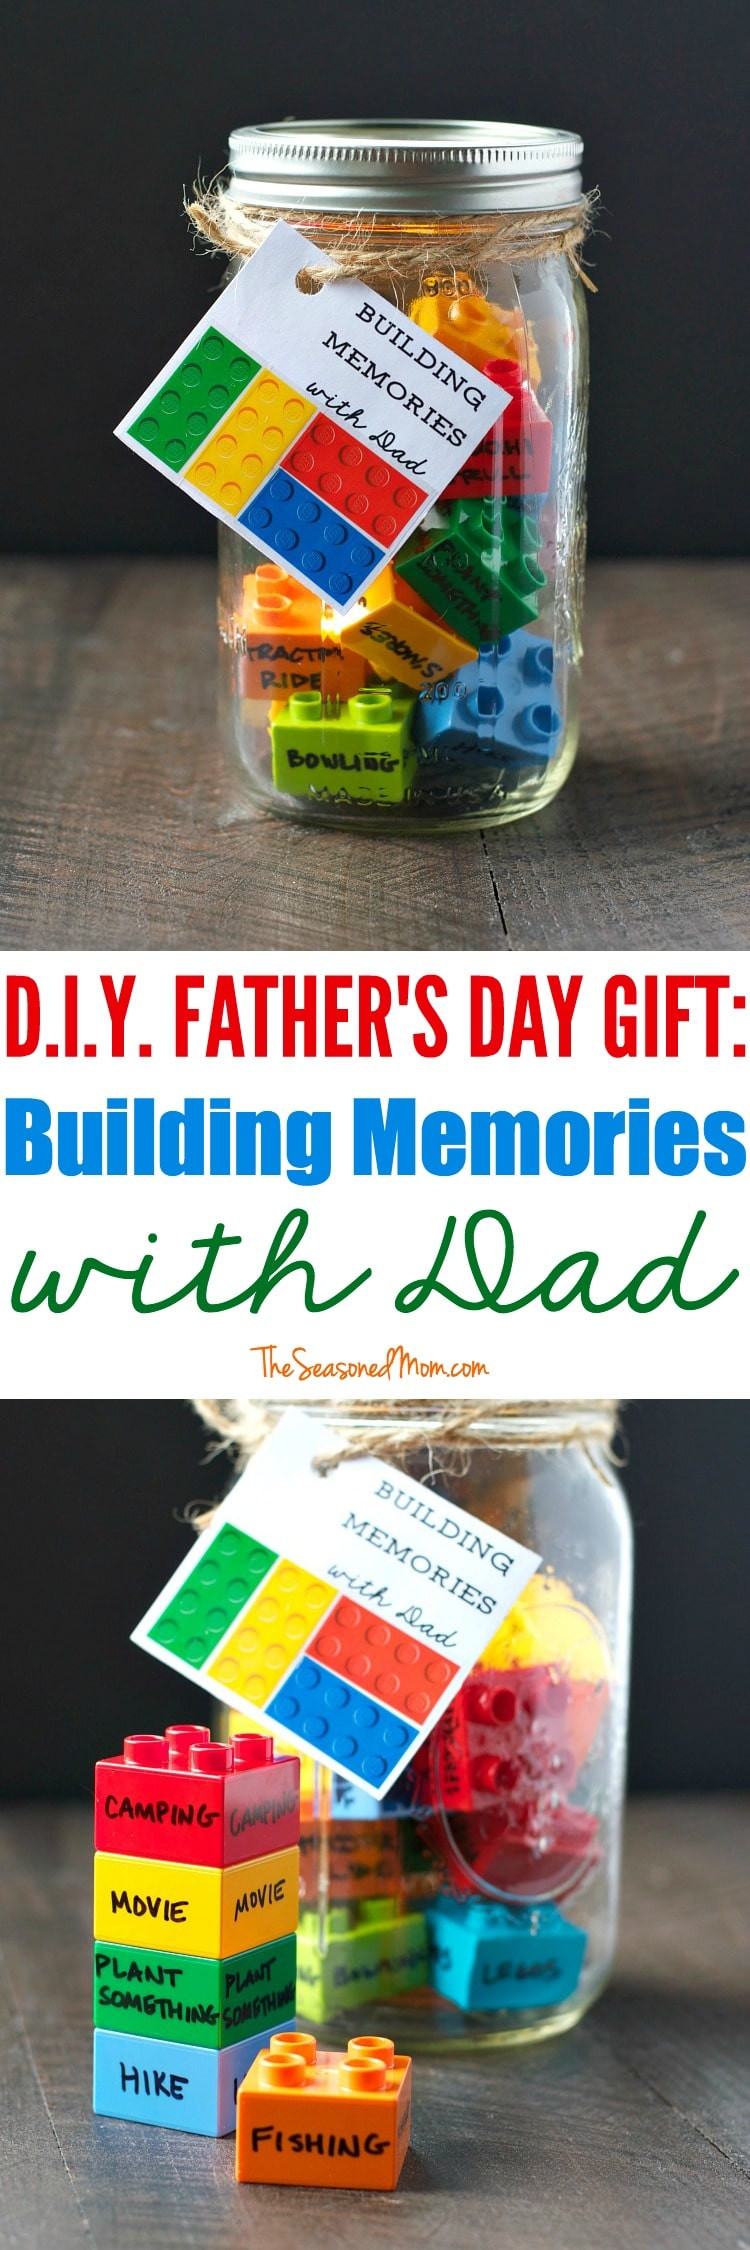 Fathers Day Presents Ideas
 25 Homemade Father s Day Gifts from Kids That Dad Can